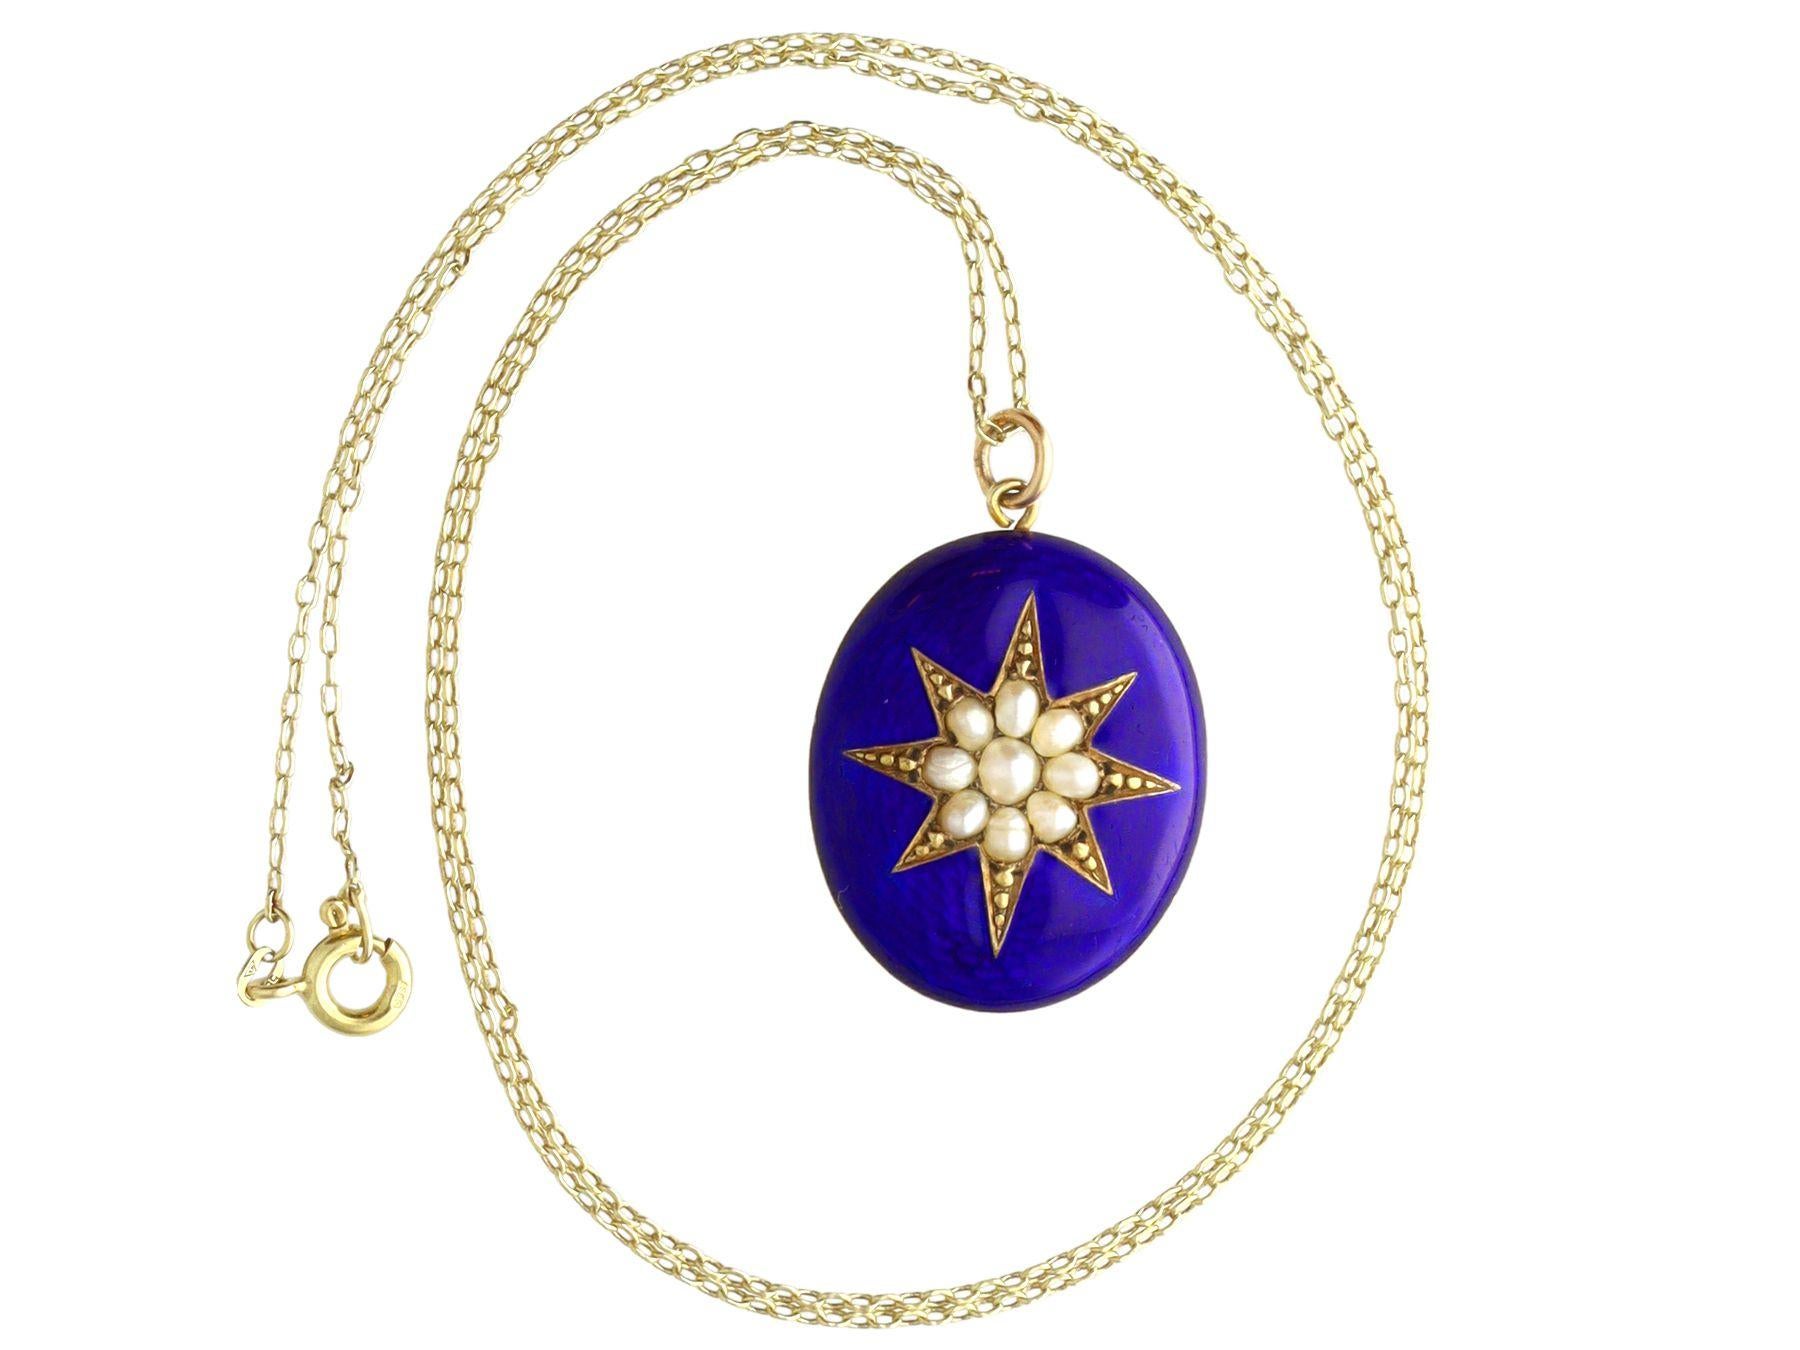 An exceptional, fine and impressive antique enamel and pearl, 9 karat and 14 karat yellow gold pendant; part of our diverse Victorian gemstone jewellery and estate jewelry collections.

This stunning antique pendant has been crafted in 9k yellow